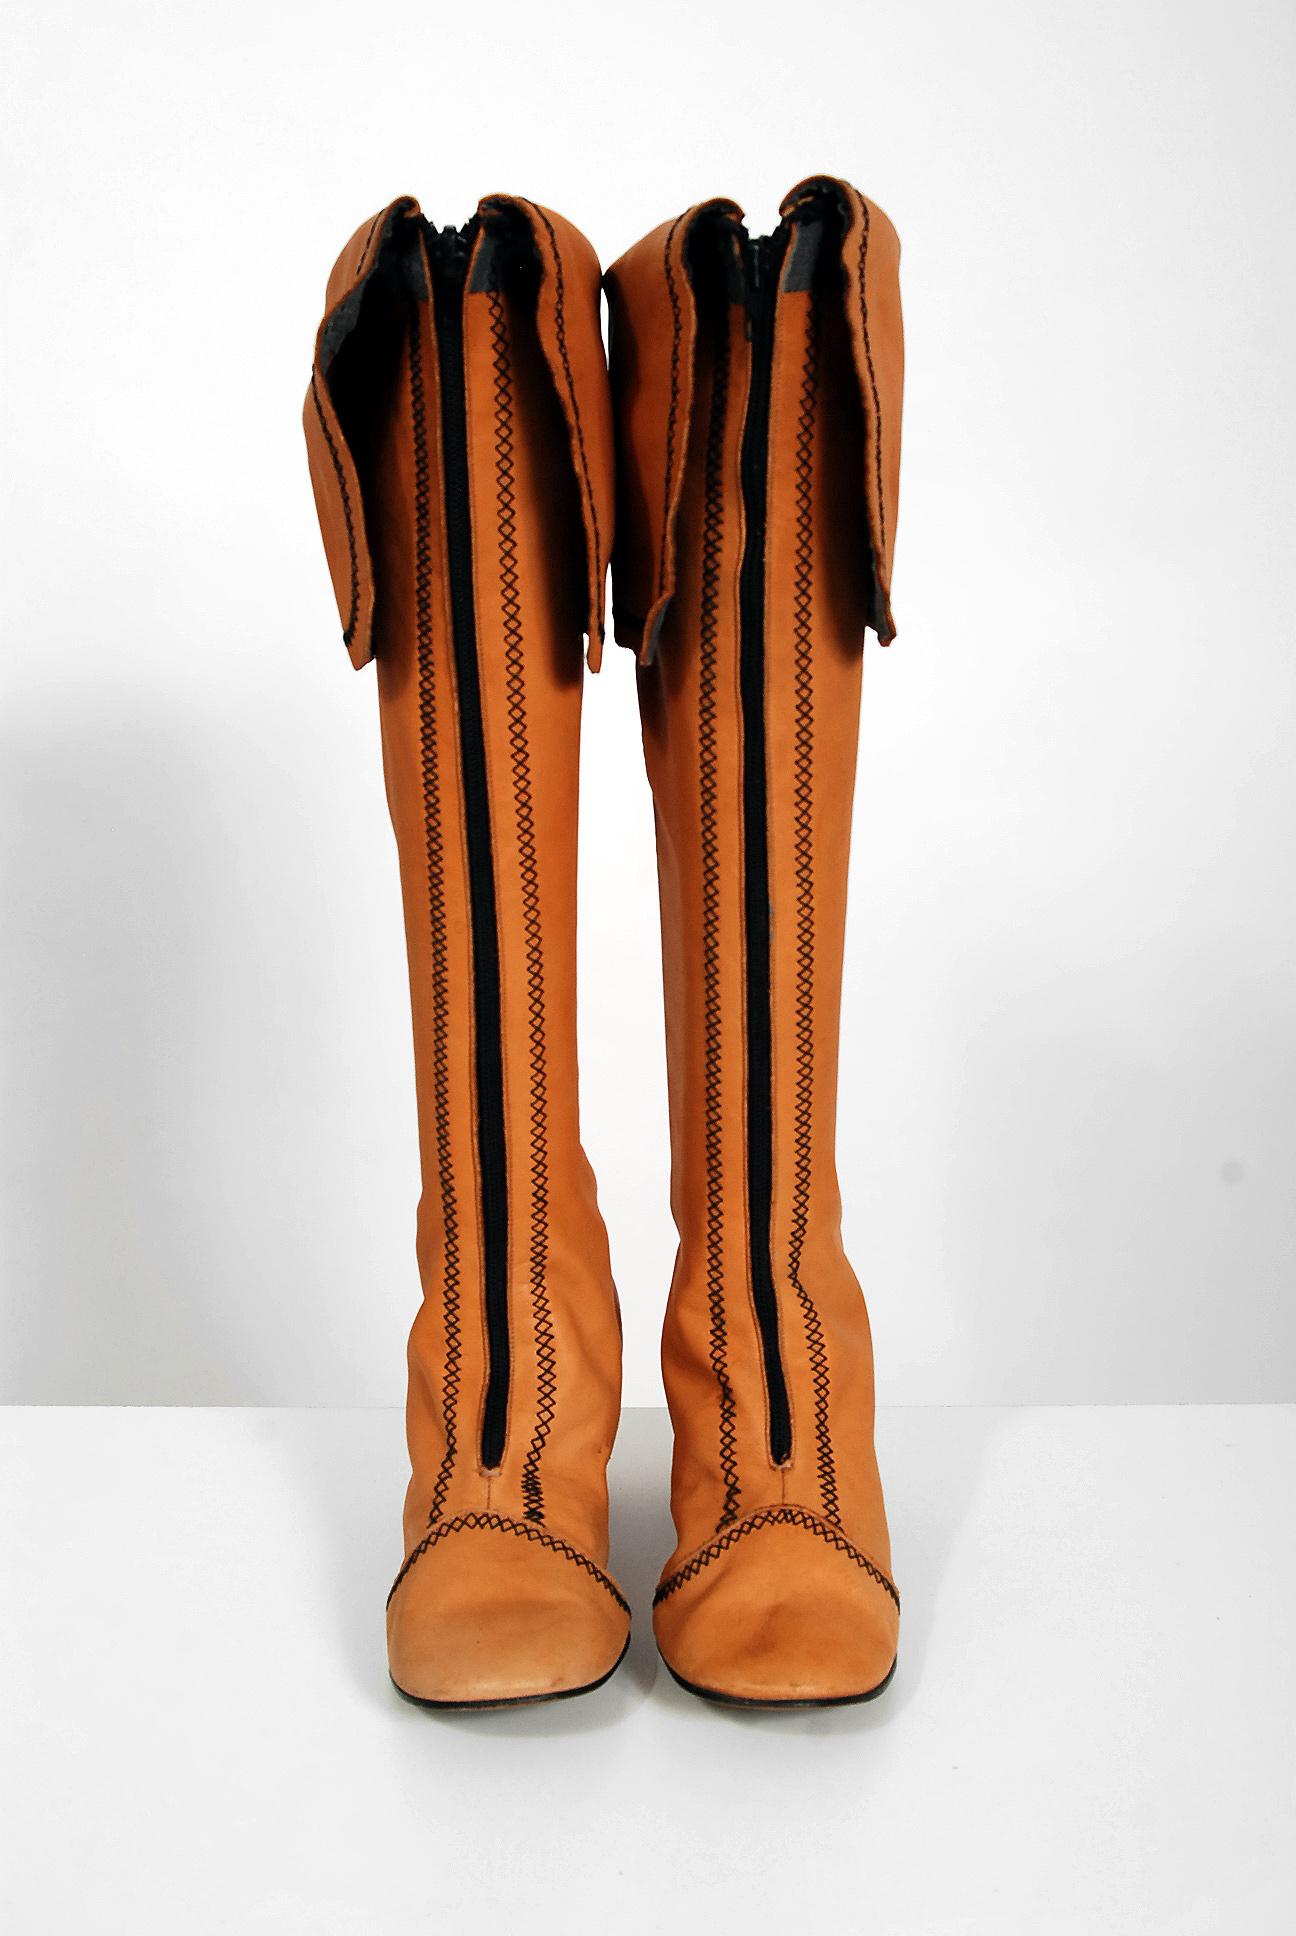 70s patchwork boots